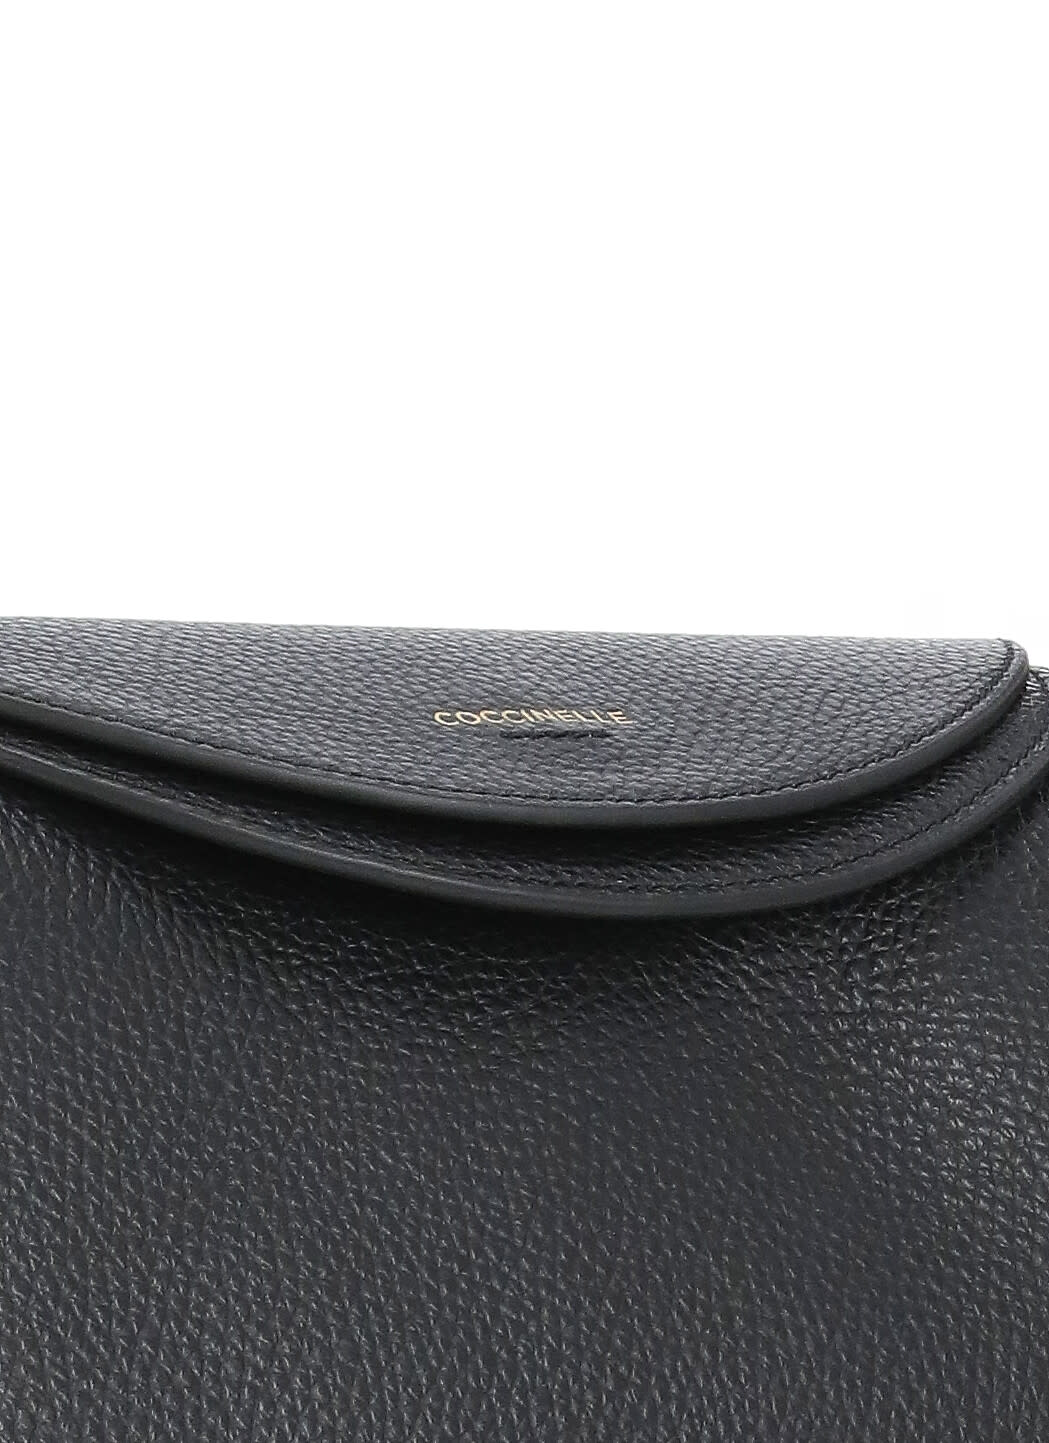 Shop Coccinelle Eclips Hand Bag In Black